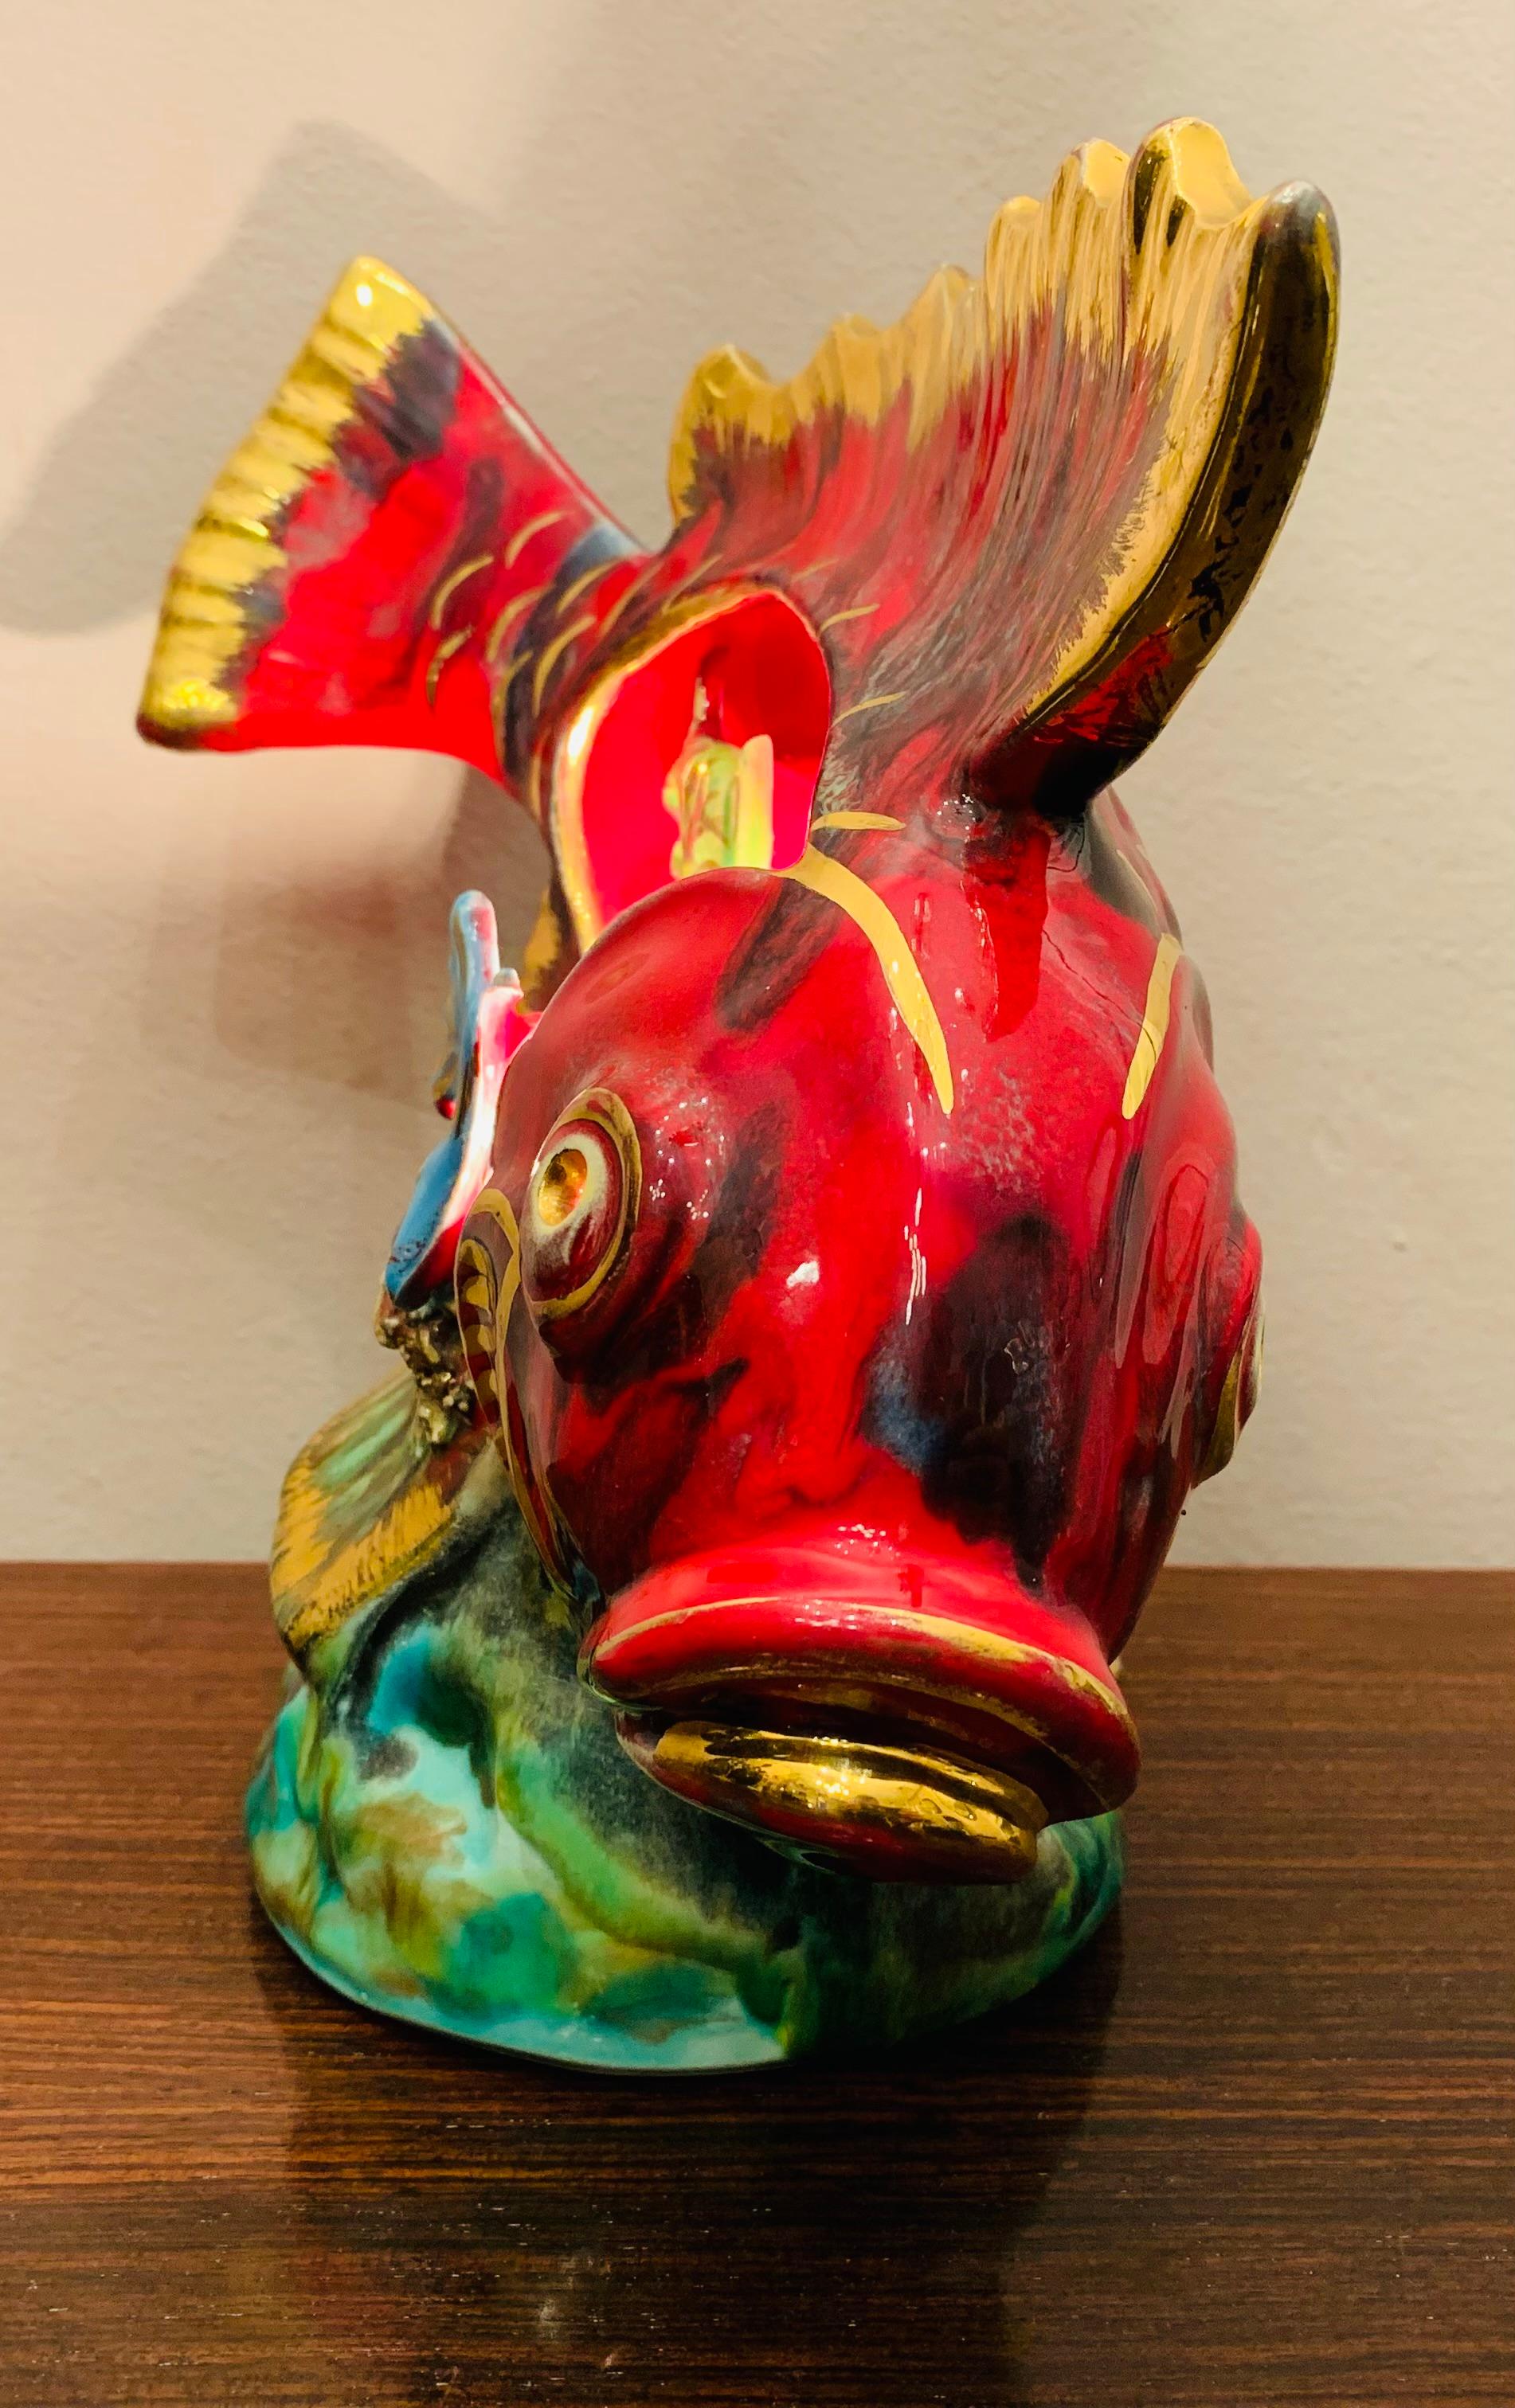 An interesting and kitsch Vallauris ceramic decorative table lamp from the 1950s/1960s of a large red and gold fish and underwater scene with three swimming fish.

The fantasy wonderland under the seabed is illuminated by a single E14 screw in